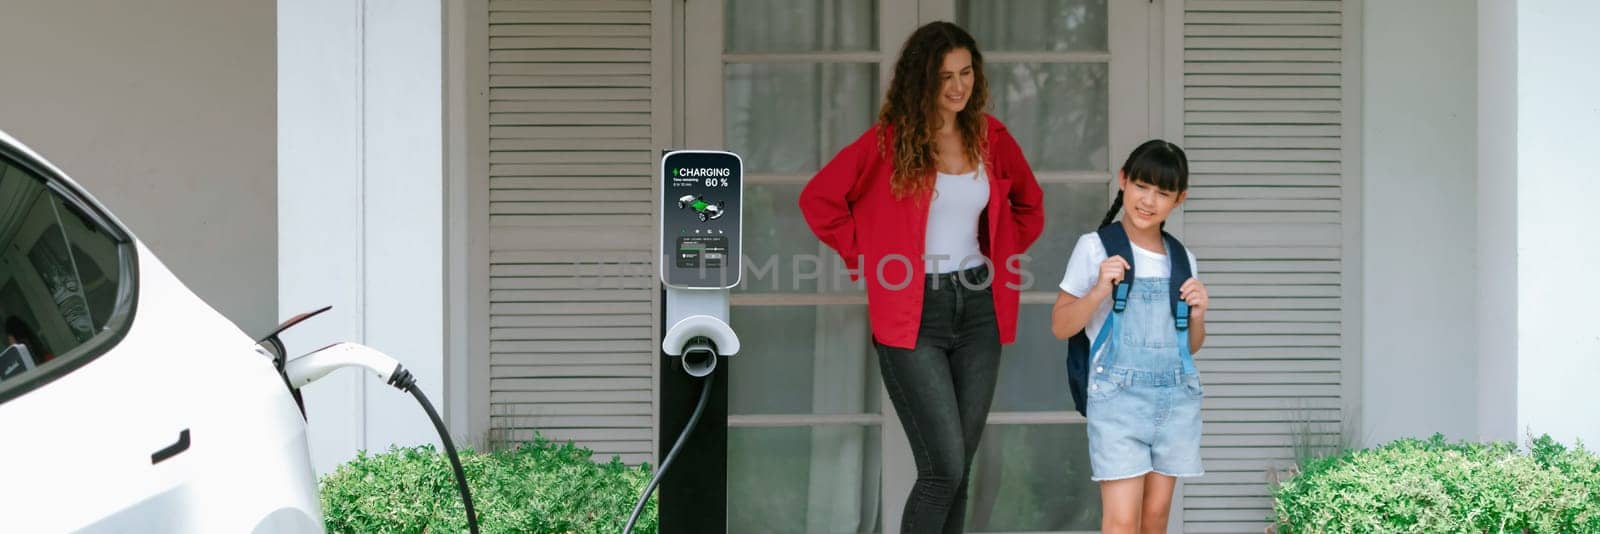 Happy little young girl learn about eco-friendly and energy sustainability as she help her mother recharge electric vehicle from home EV charging station. EV car and modern family. Panorama Synchronos